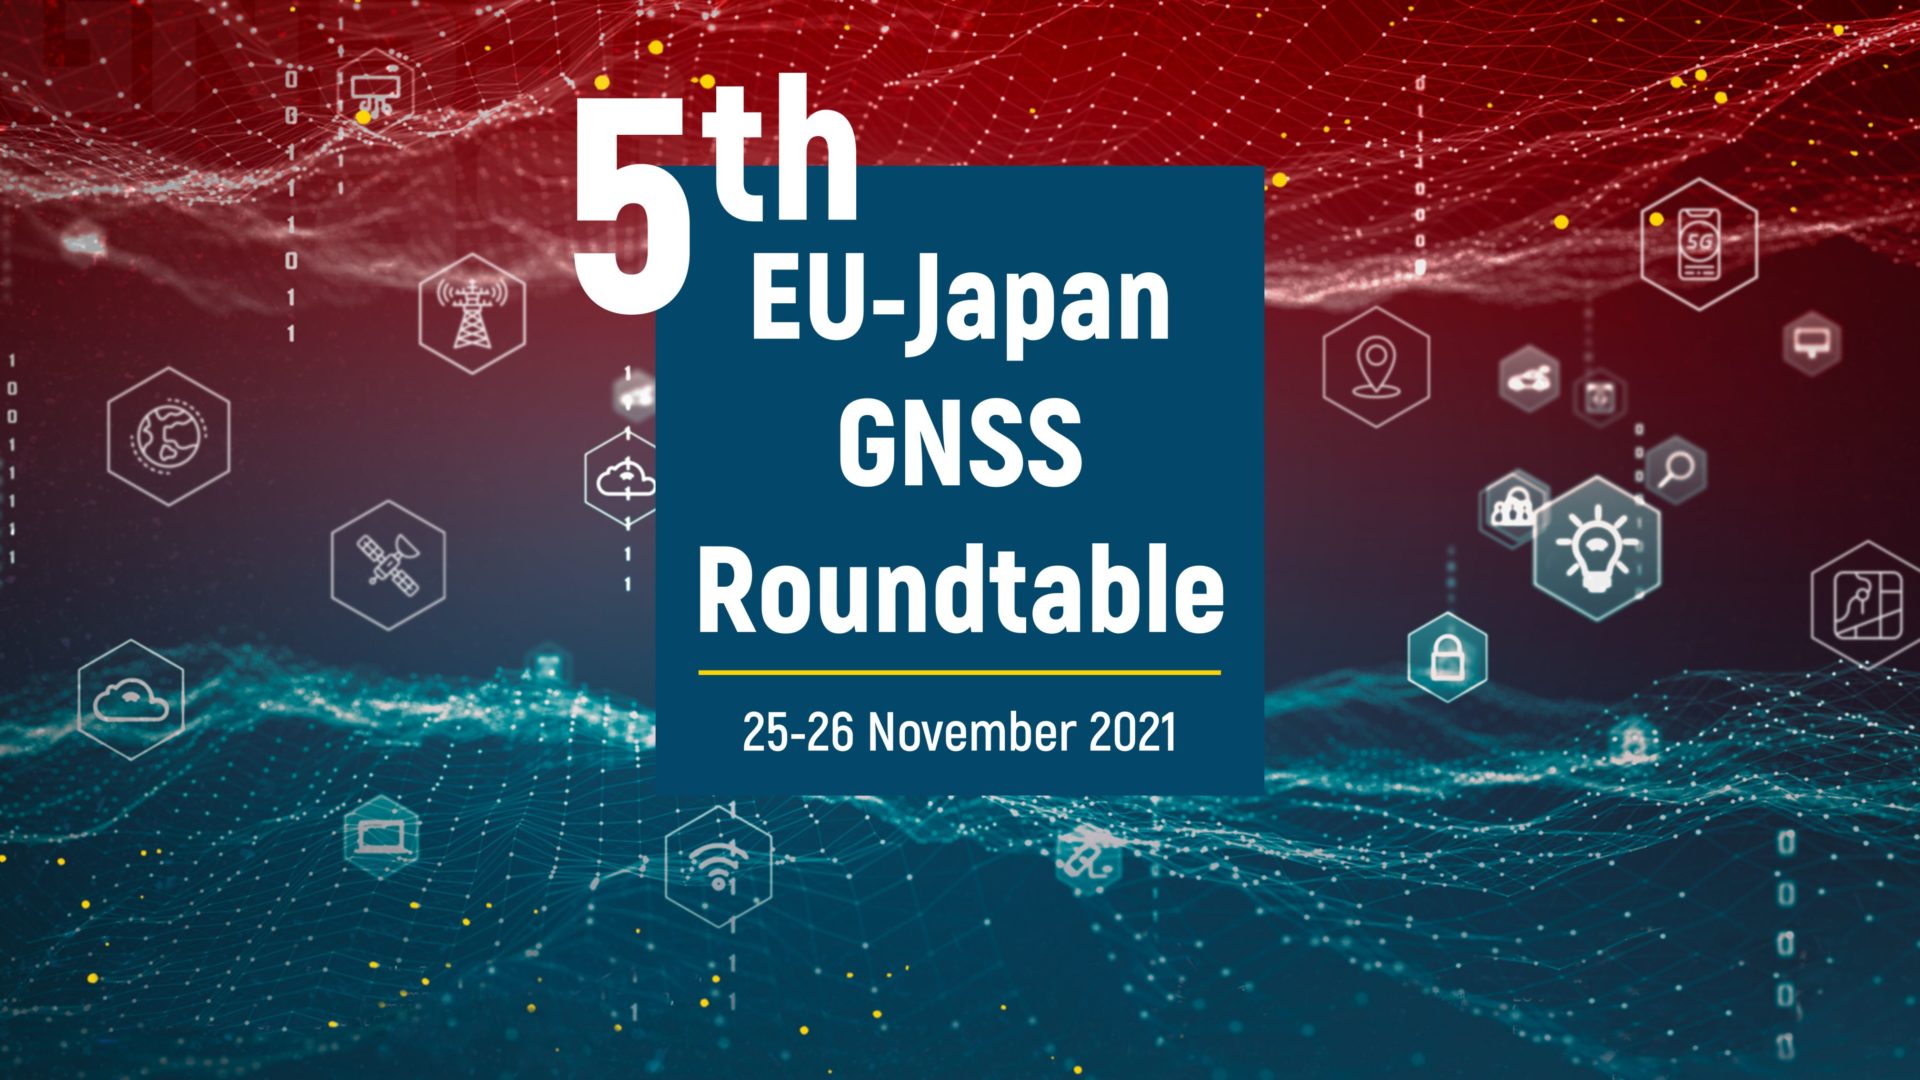 Flashback to the EU-Japan GNSS Roundtable